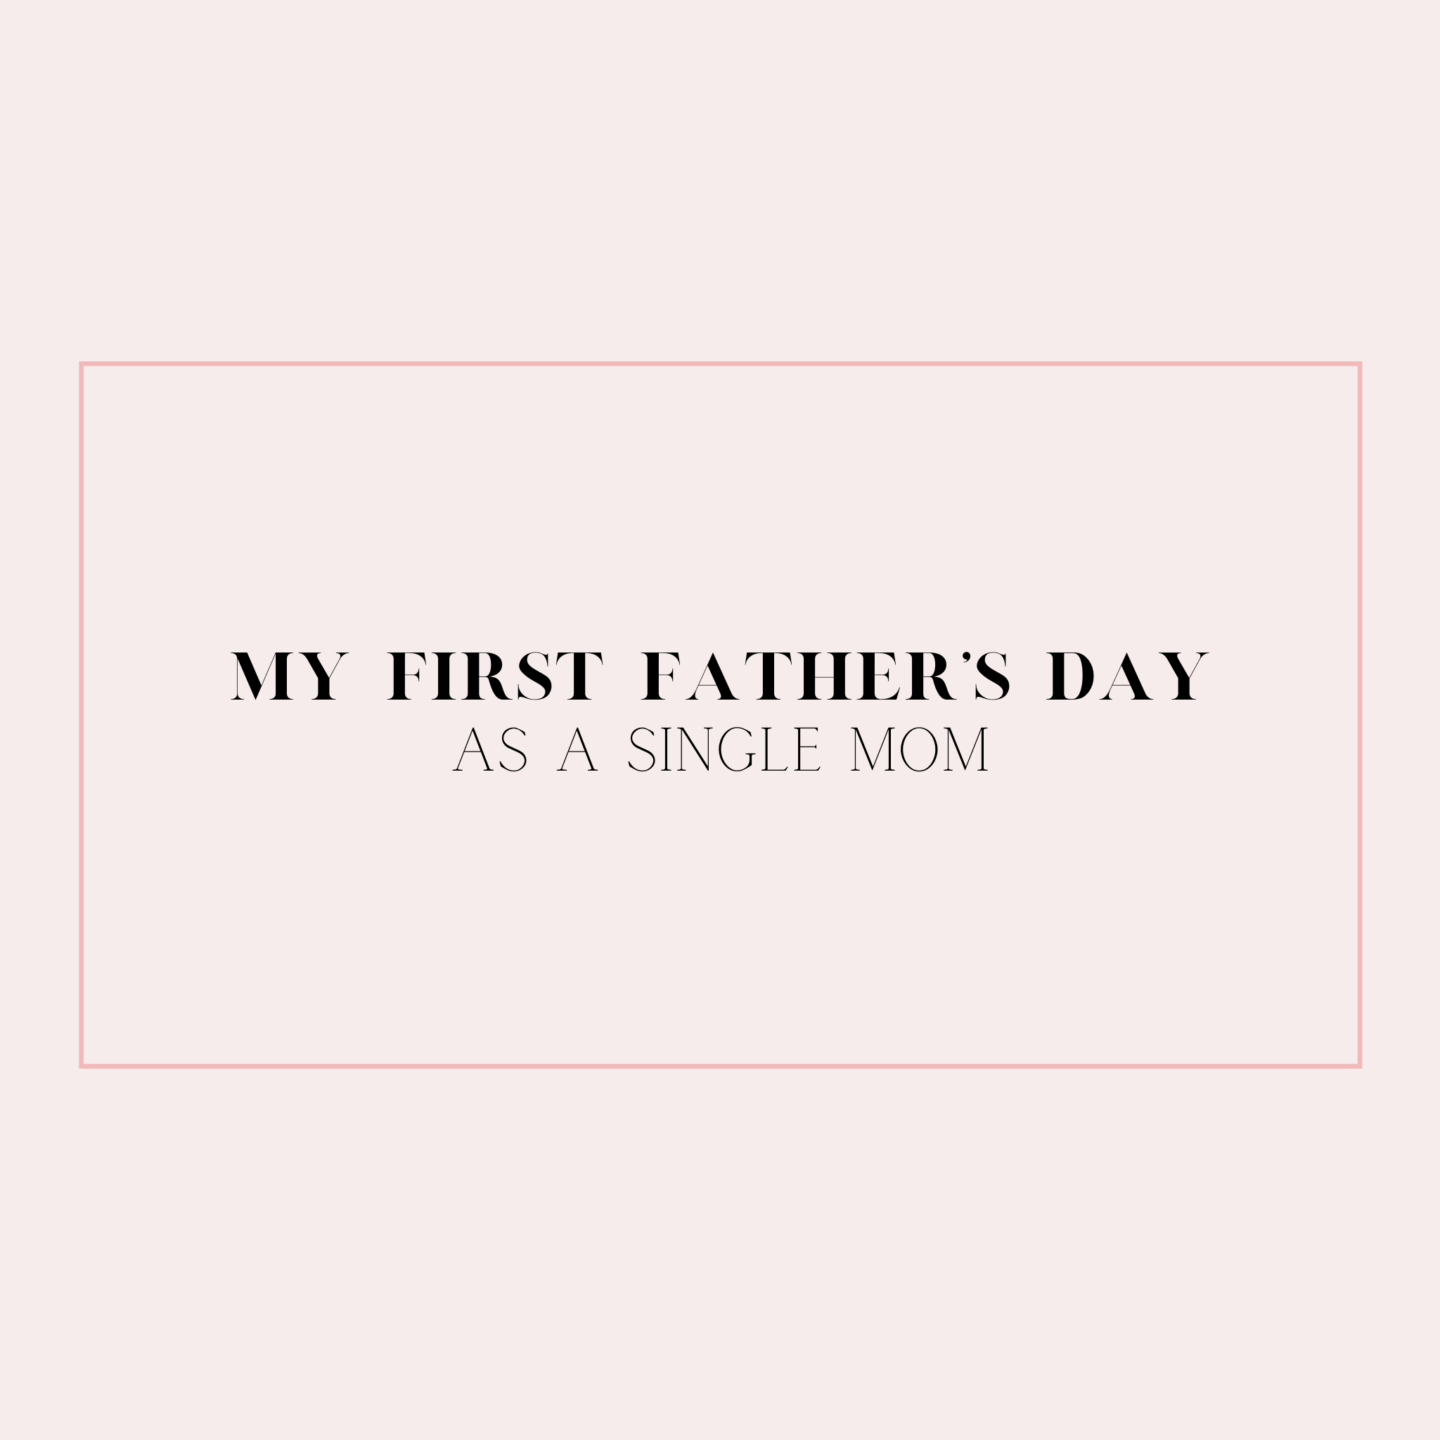 My First Father’s Day as a Single Mom